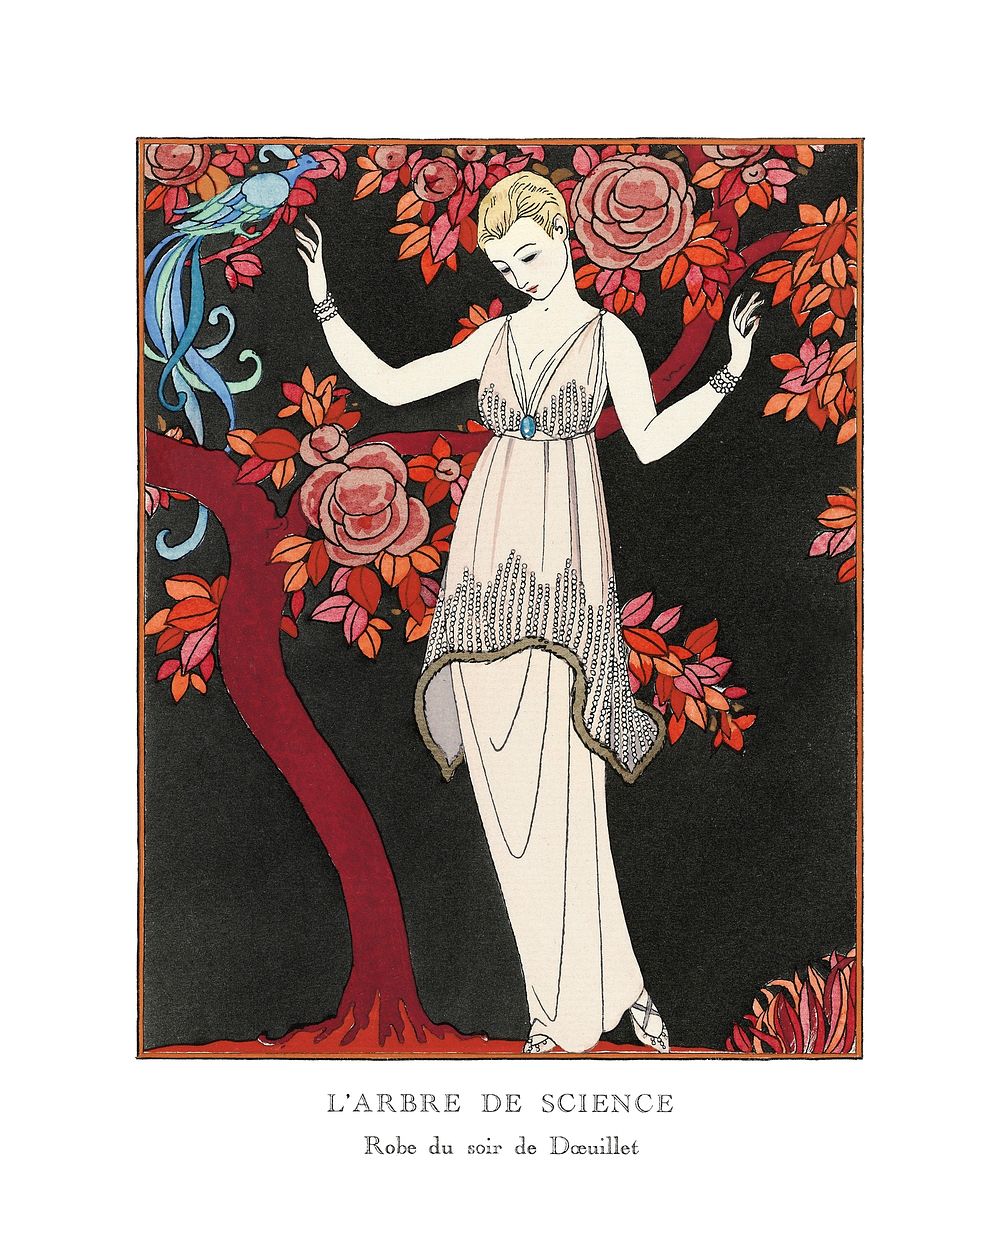 Flapper era poster, art deco fashion illustration remix from the artwork of George Barbier